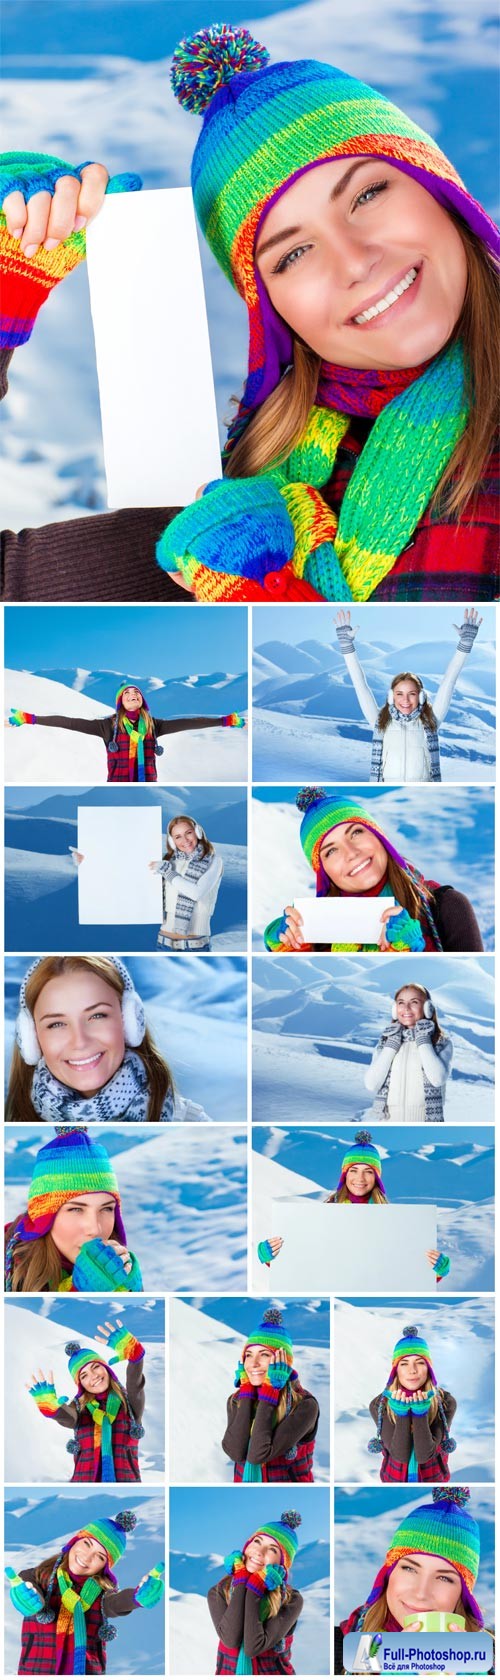 Winter vacation in the mountains stock photo 4